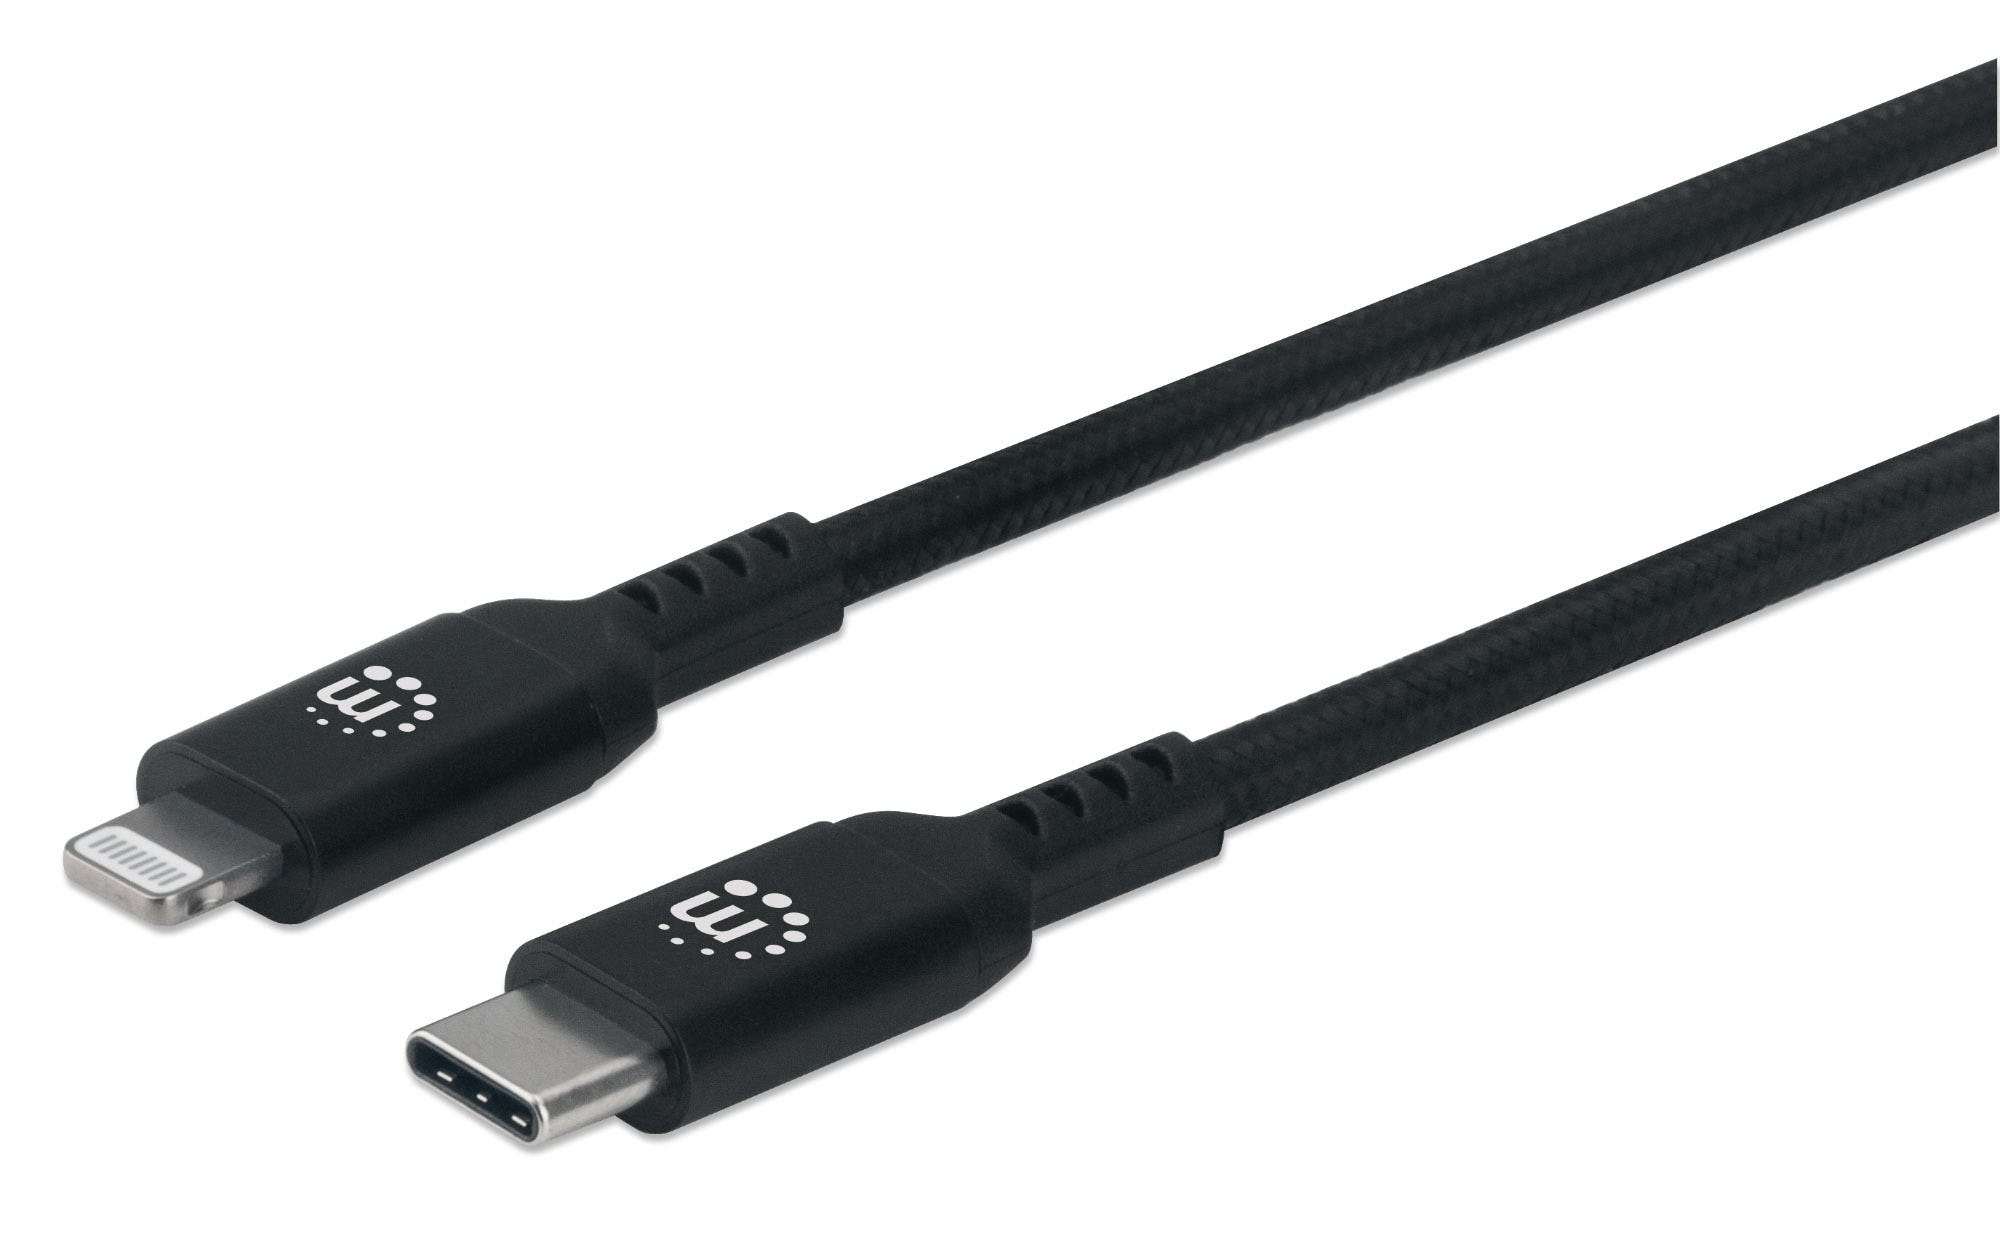 Manhattan Charge & Sync Lightning® Cable, USB-C to Lighting, 1.8m, Male to Male, MFi Certified (Apple approval program)